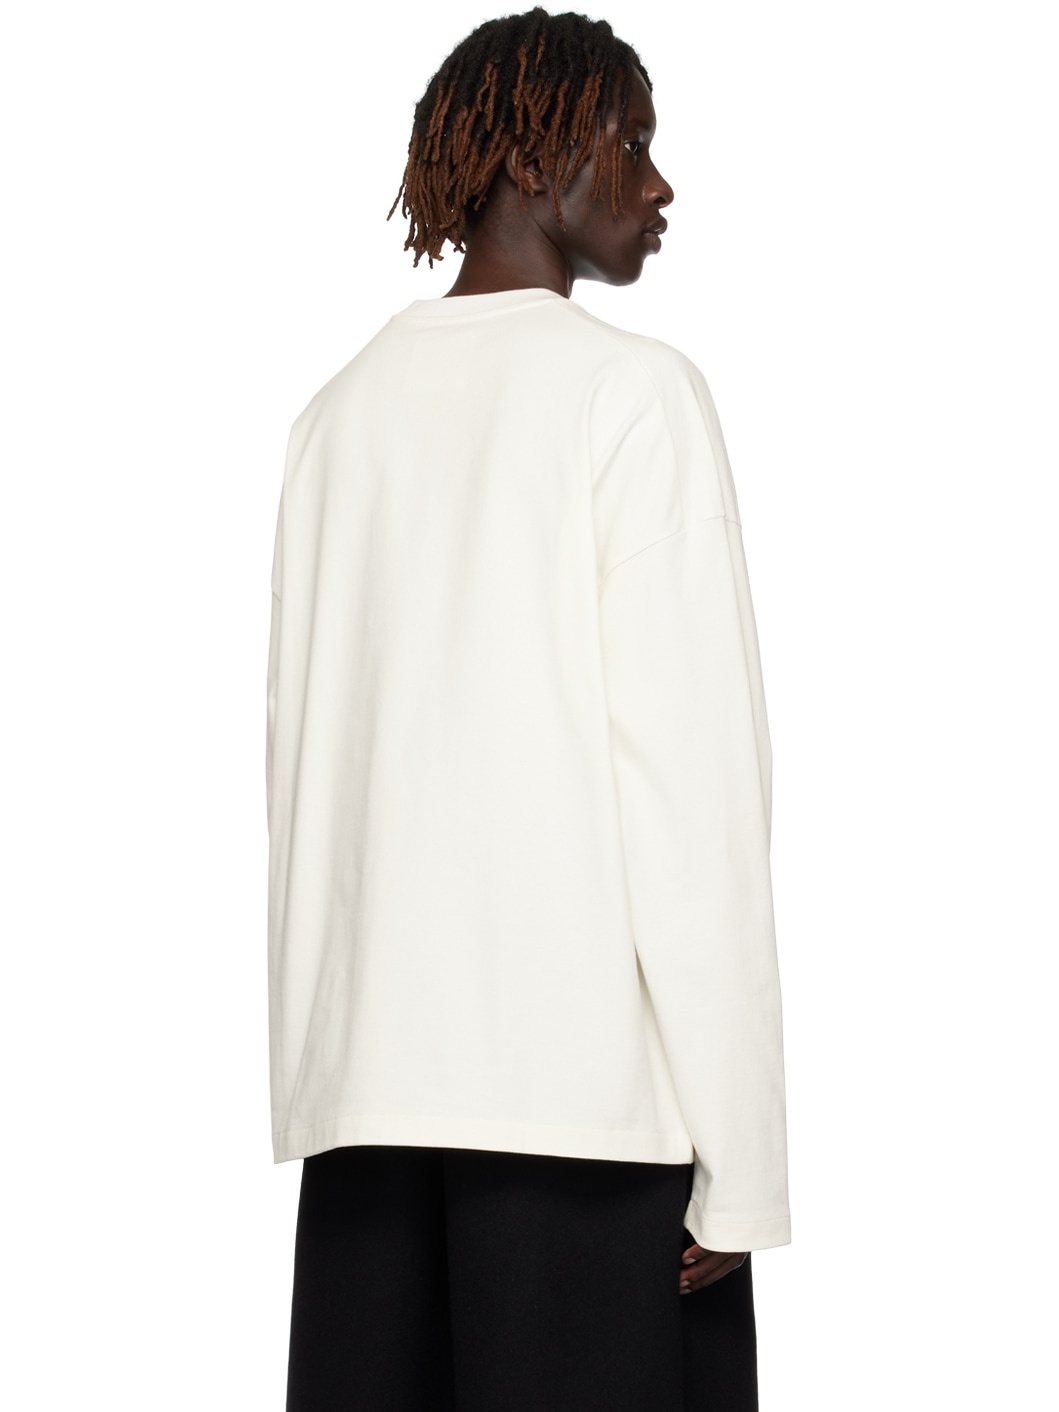 Off-White Printed Long Sleeve T-Shirt - 3